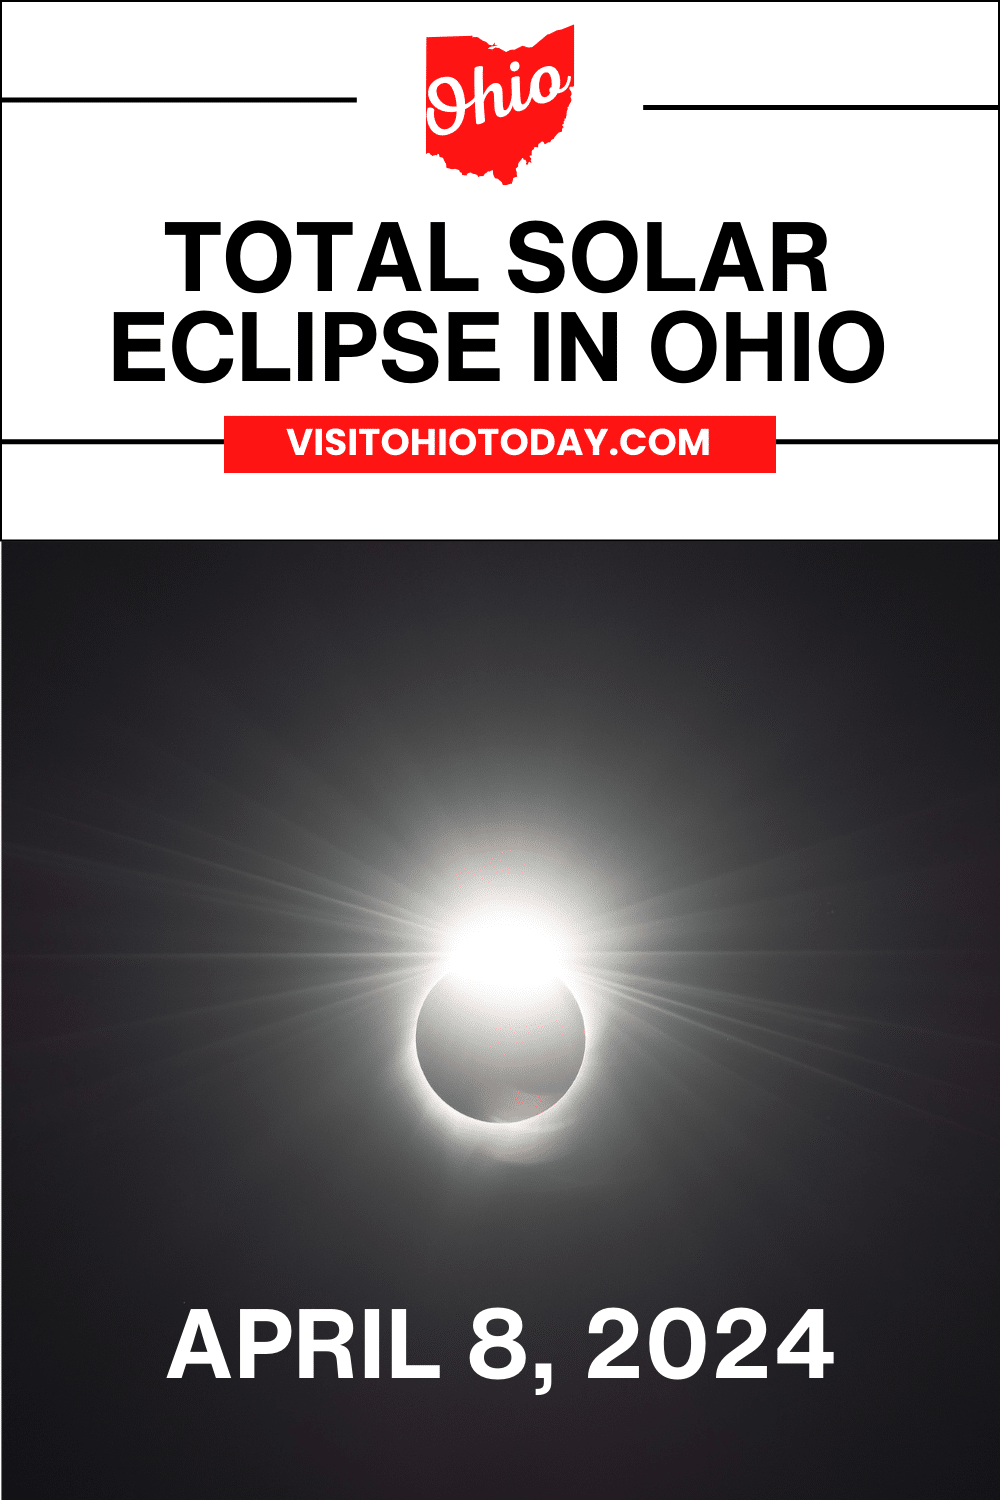 vertical image with a photo of a total eclipse A white strip across the top has the text Total Solar Eclipse in Ohio and at the bottom is the text April 8, 2024